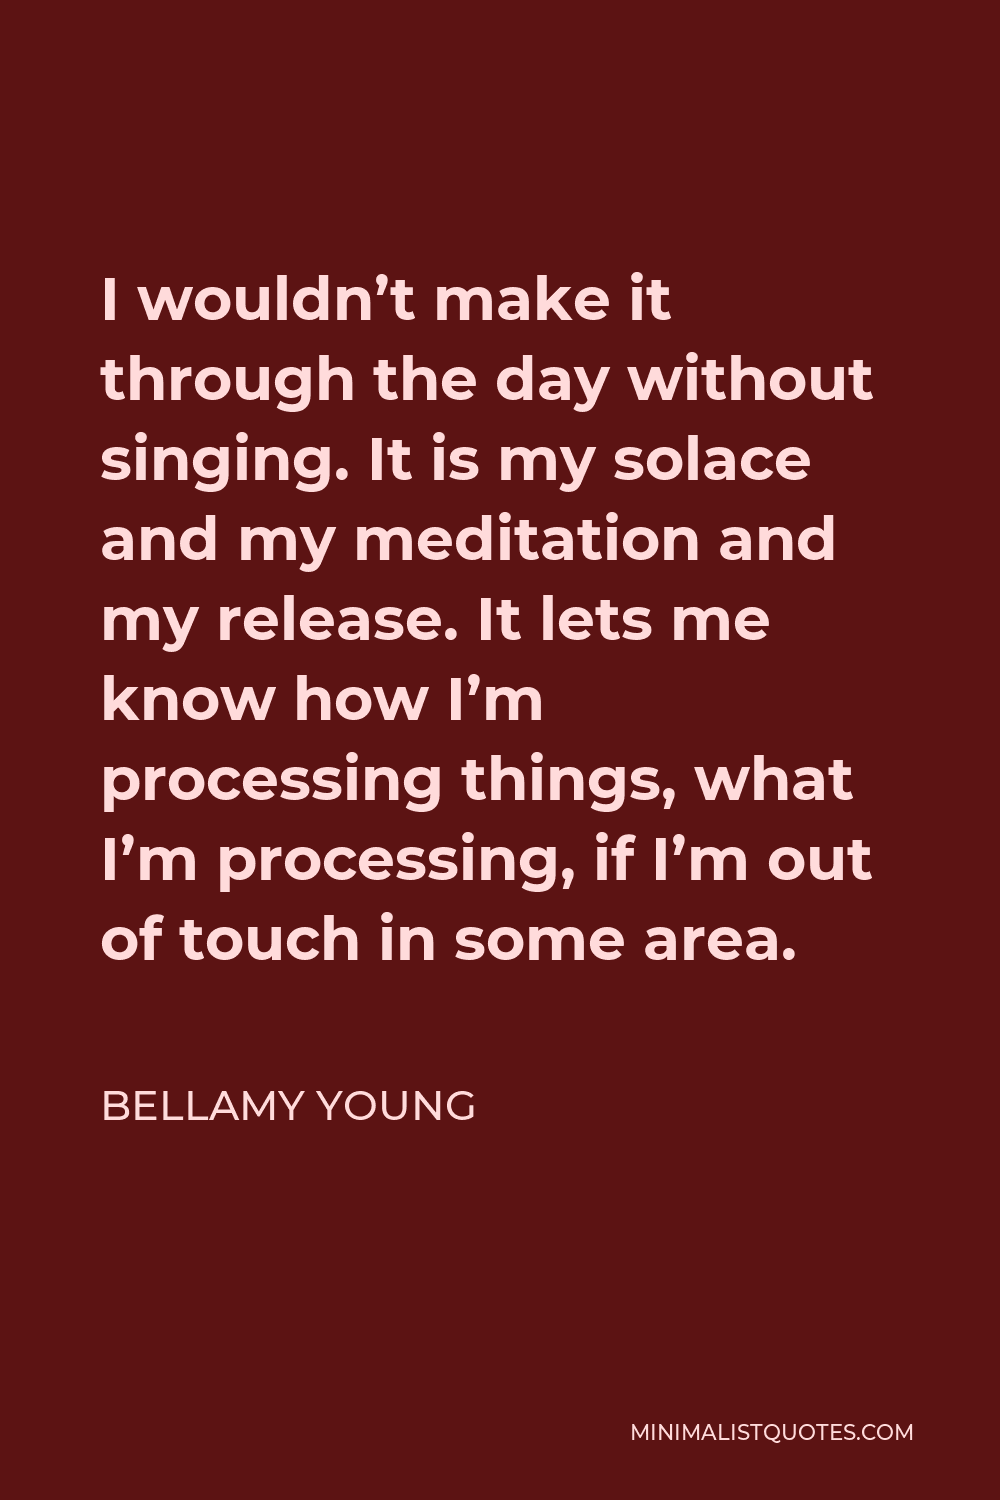 Bellamy Young Quote - I wouldn’t make it through the day without singing. It is my solace and my meditation and my release. It lets me know how I’m processing things, what I’m processing, if I’m out of touch in some area.